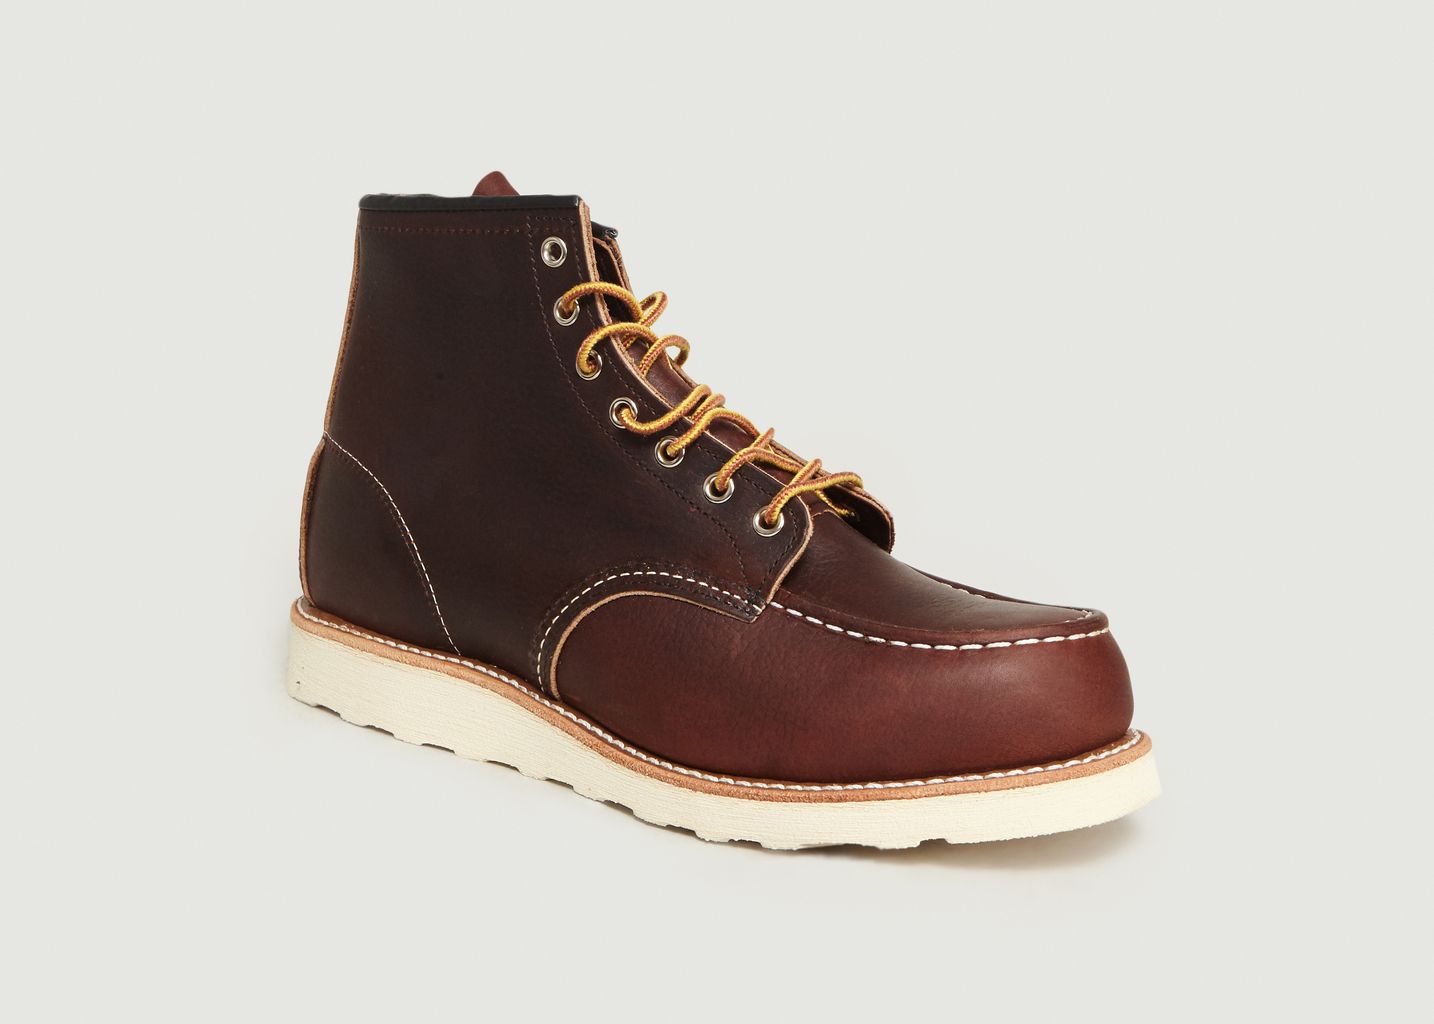 Boots En Cuir A Lacets 8138 - Red Wing Shoes